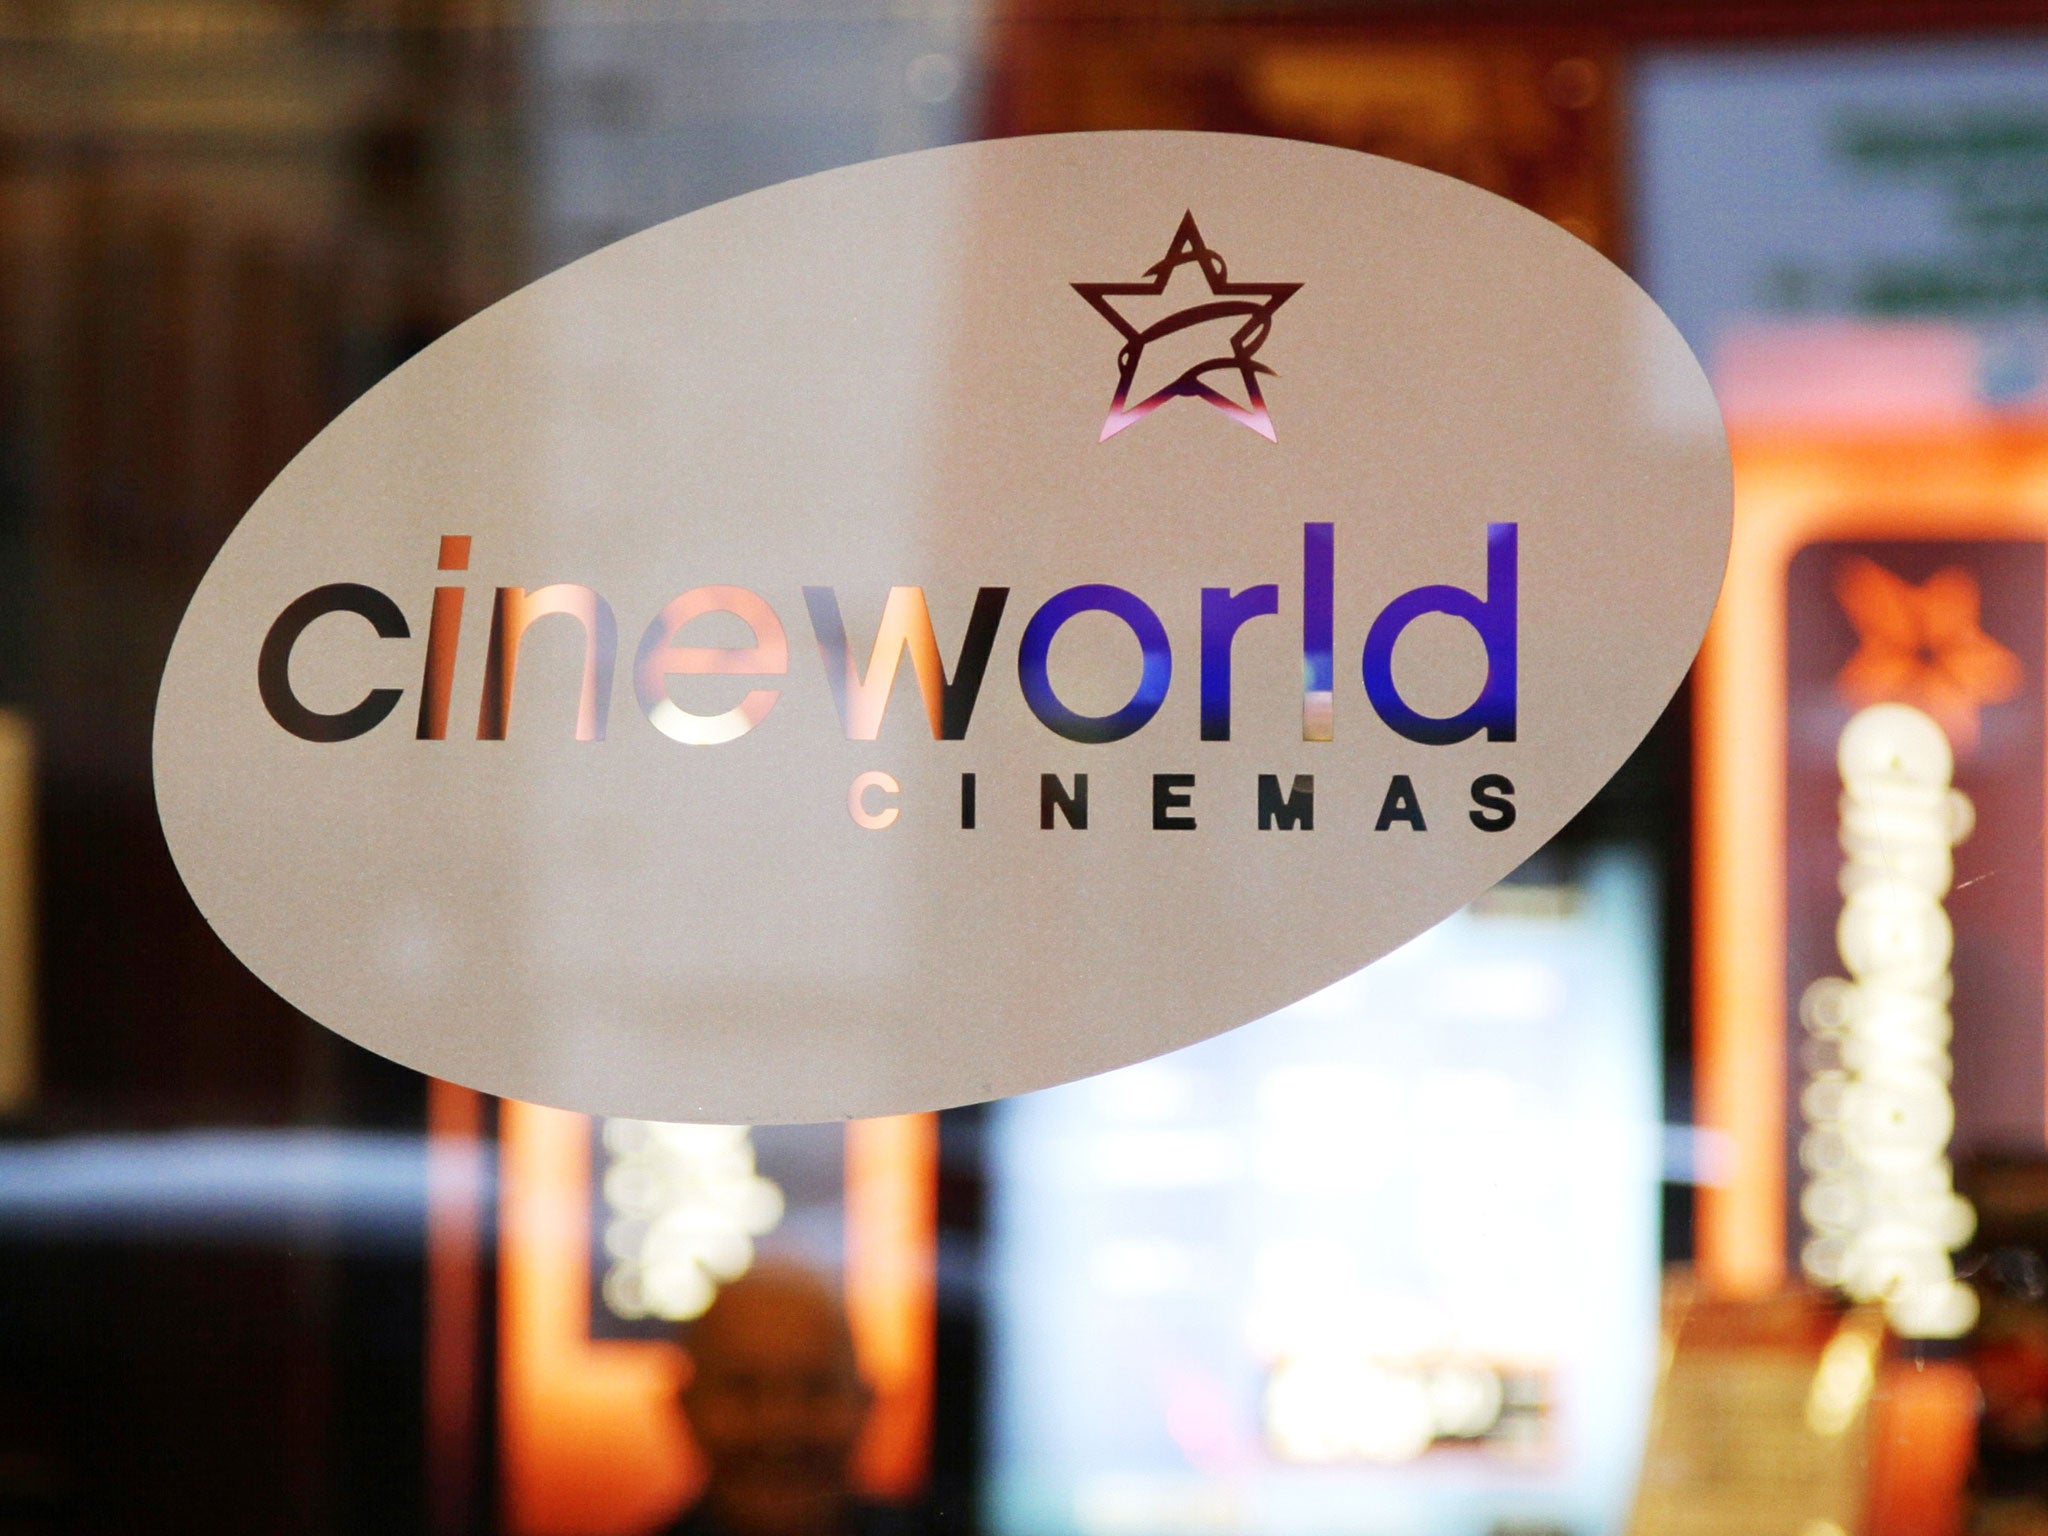 Cineworld will buy Picturehouse for £47m